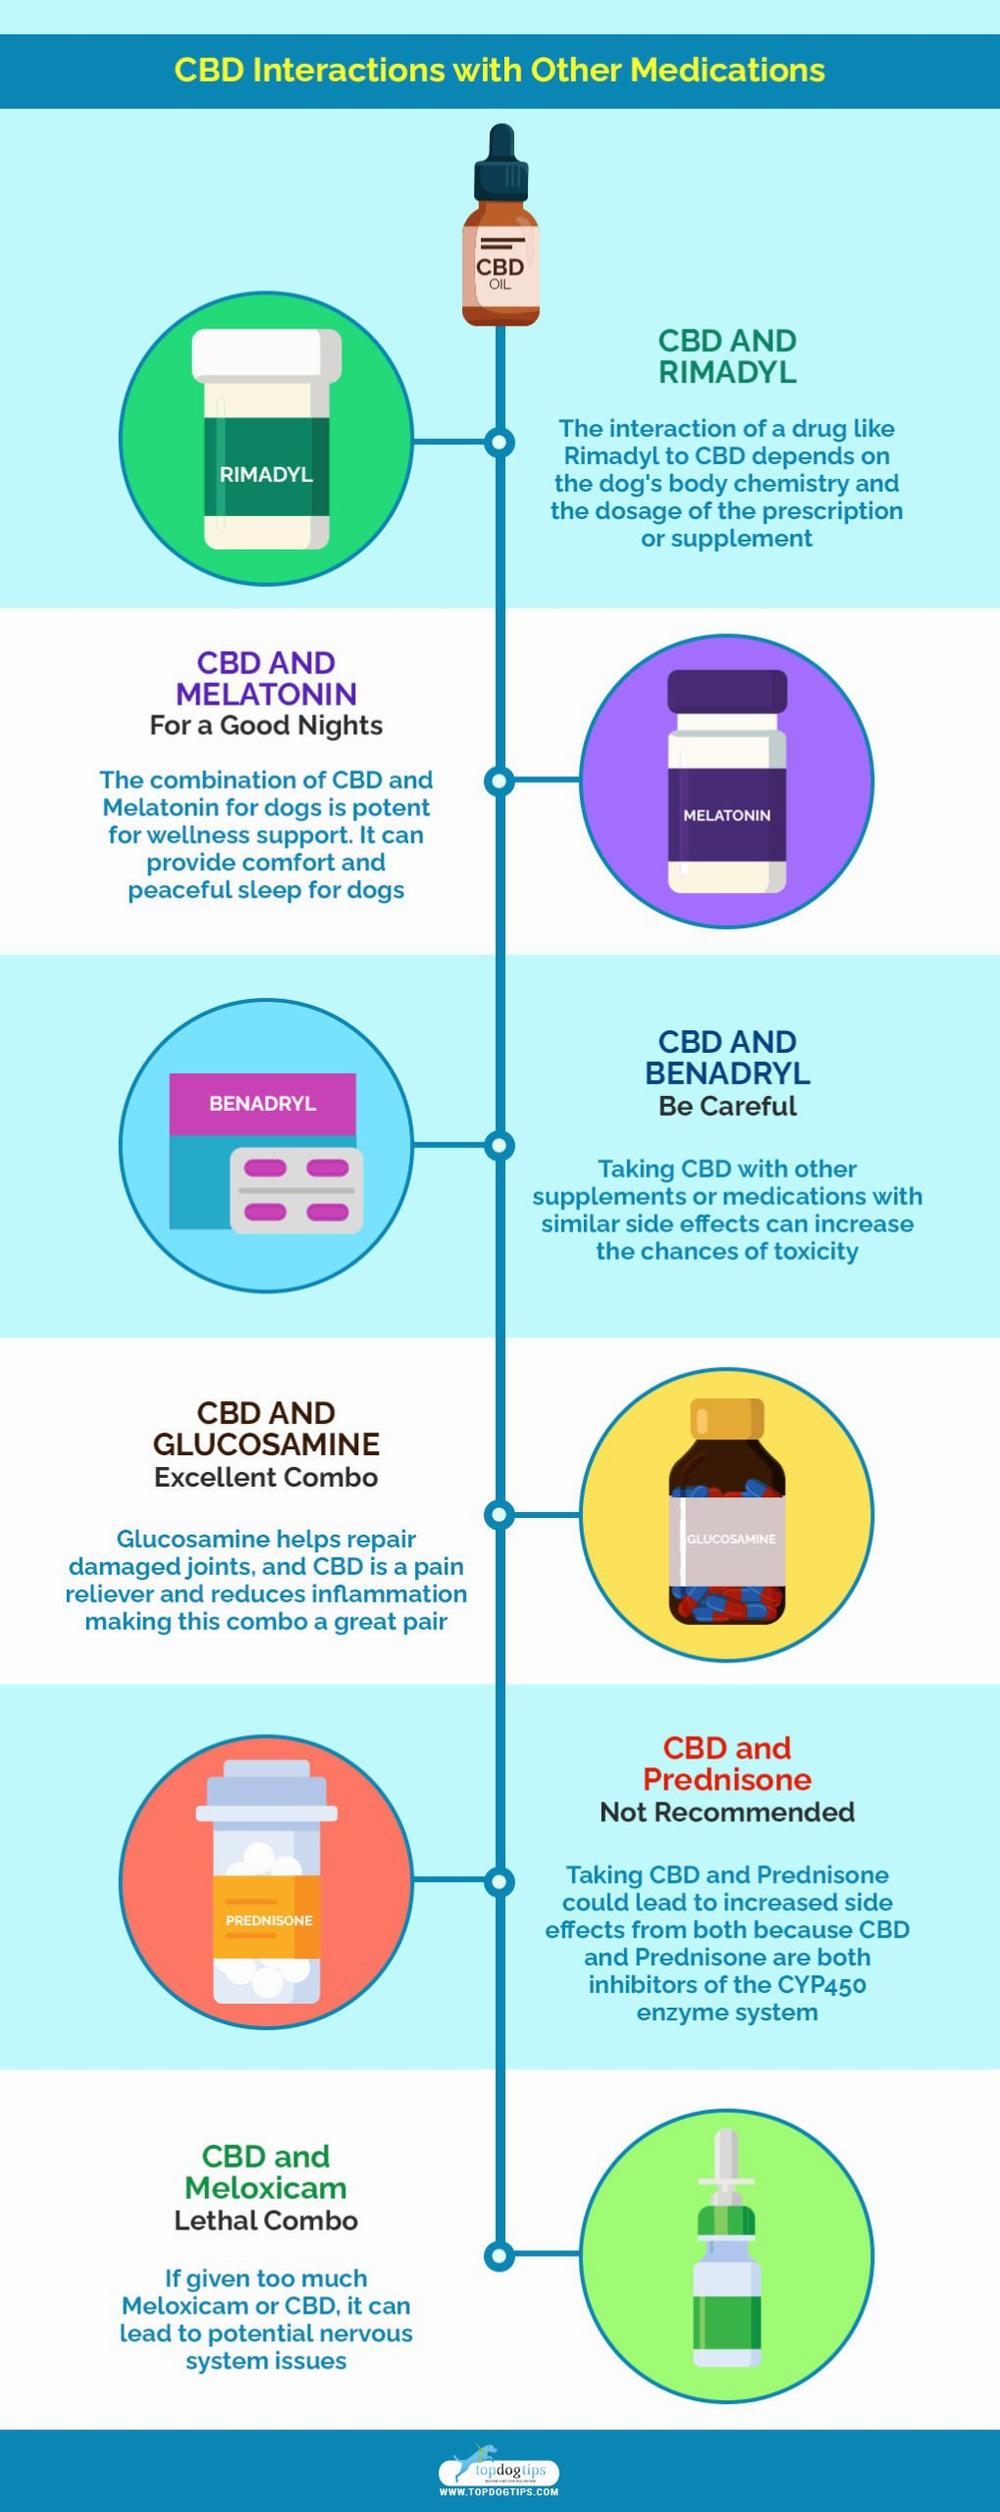 A chart of possible interactions between CBD and other medications a dog may be taking.